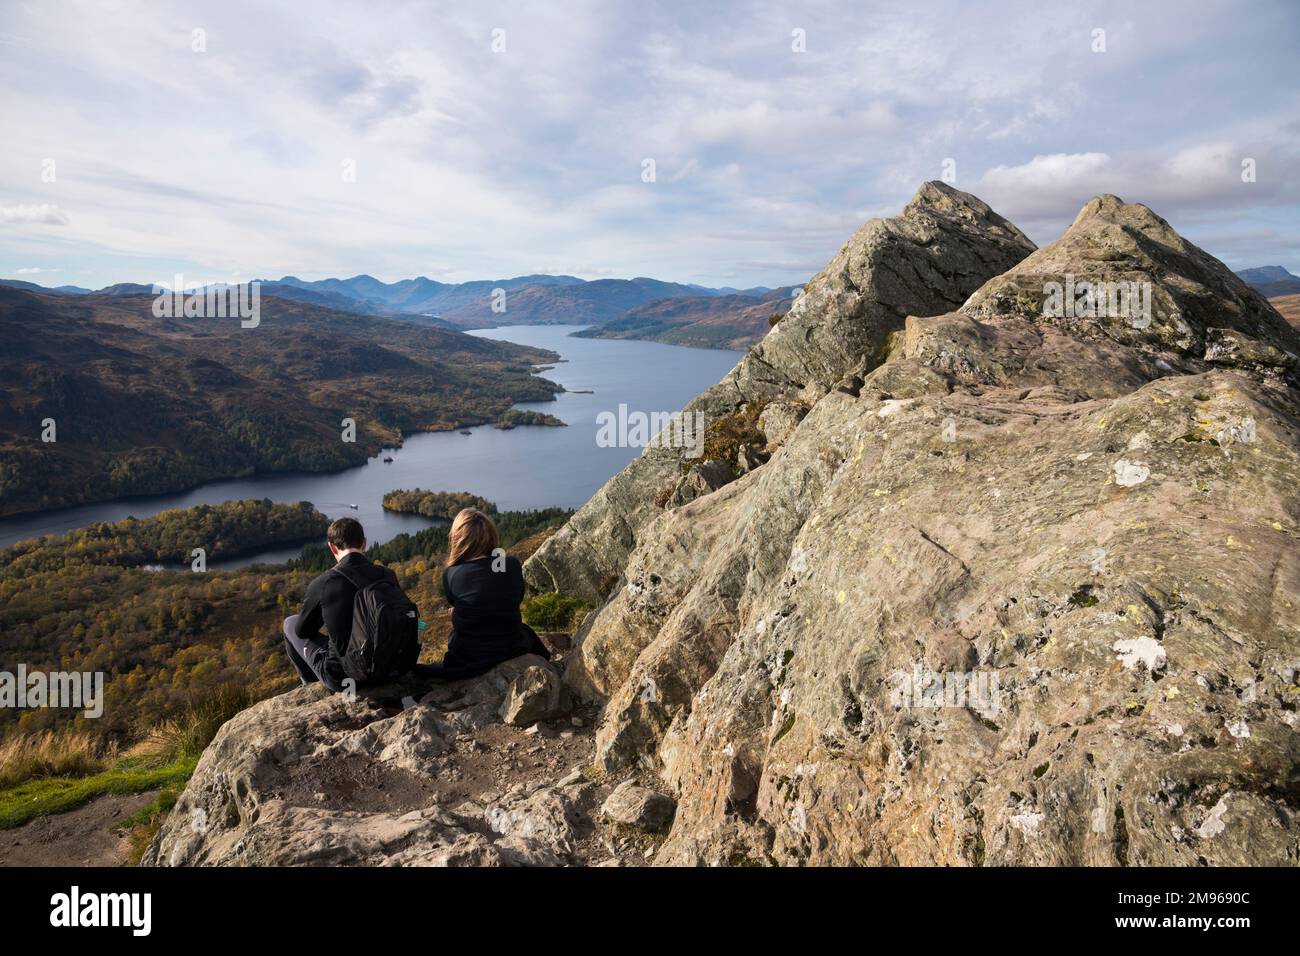 Summit of Ben A'an, looking towards Loch Katrine, Loch Lomand and Trossachs National Park, Scotland Stock Photo